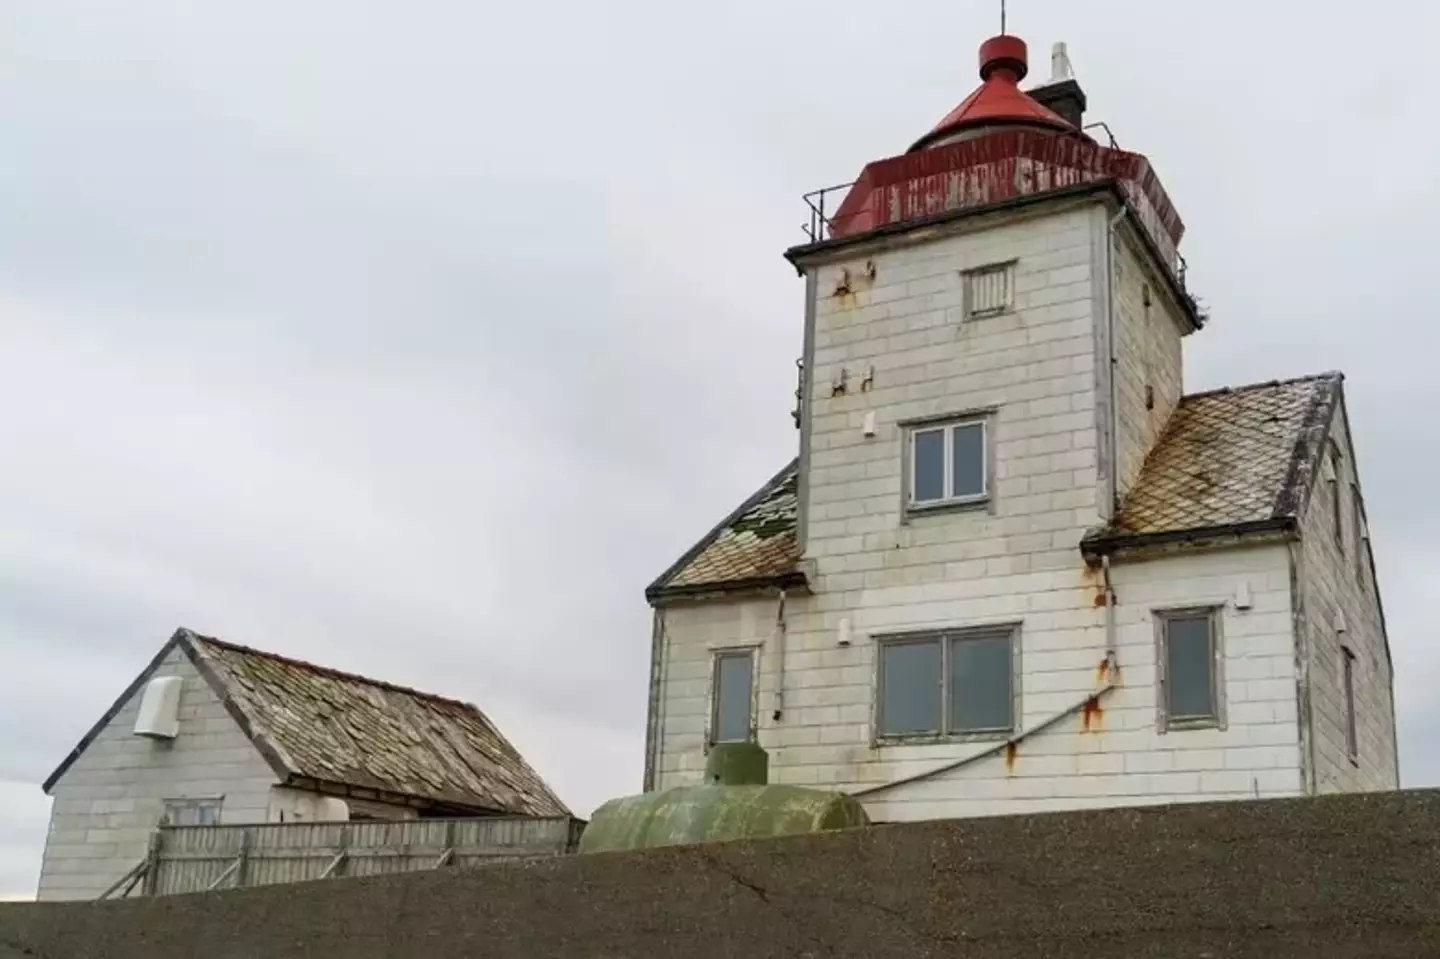 The lighthouse was built way back in 1907.